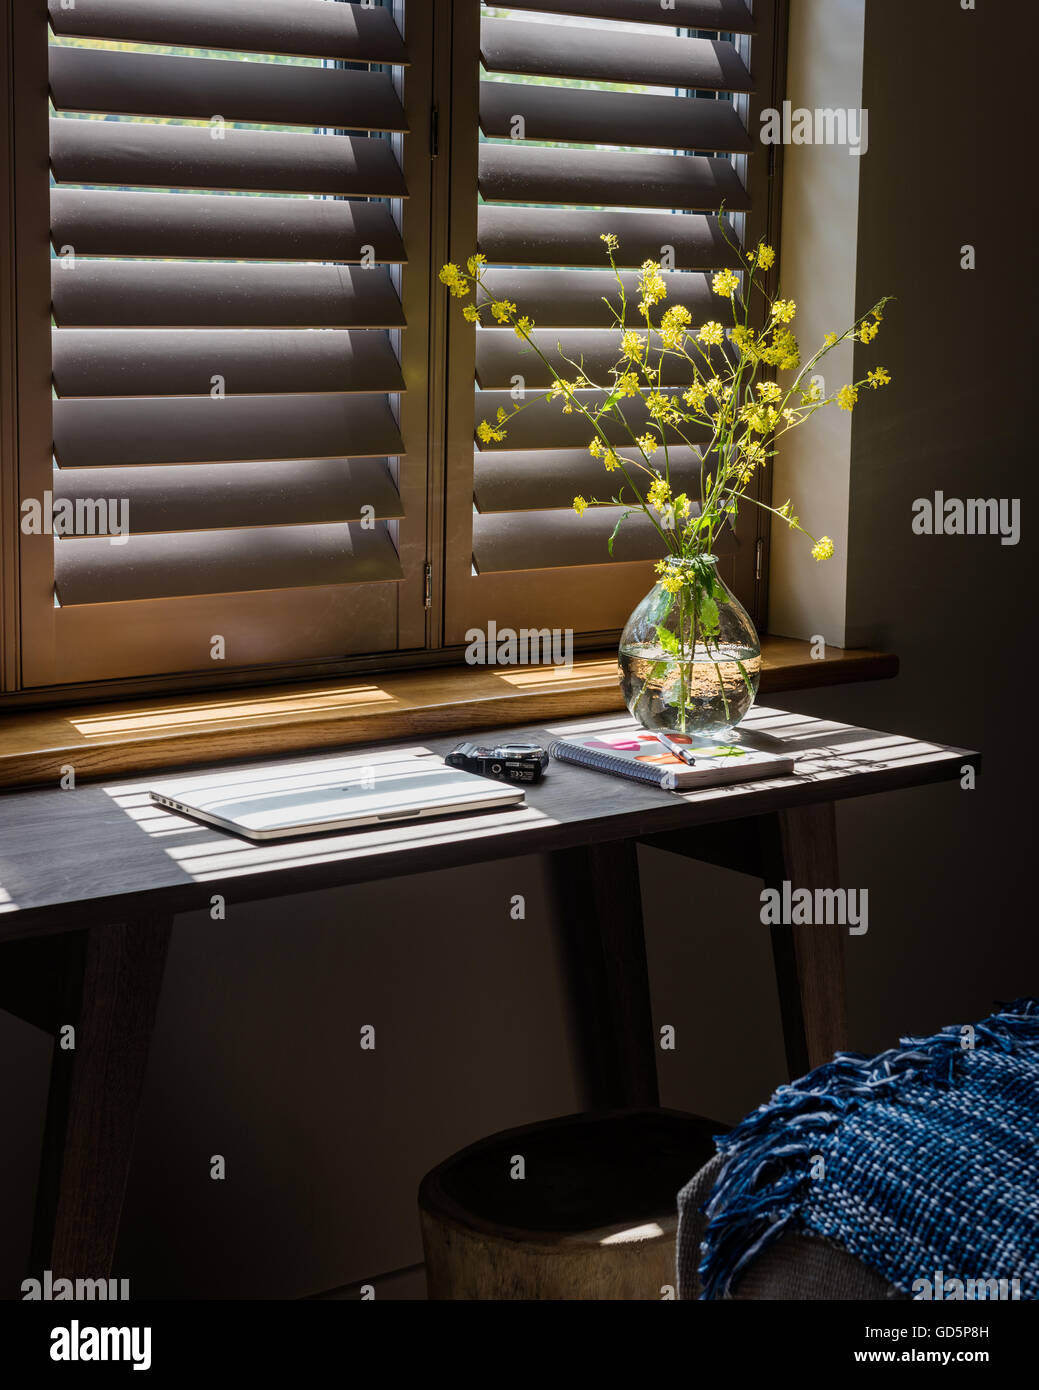 Detail of vase with sprigs of yellow flowers with plantation shutters in background Stock Photo